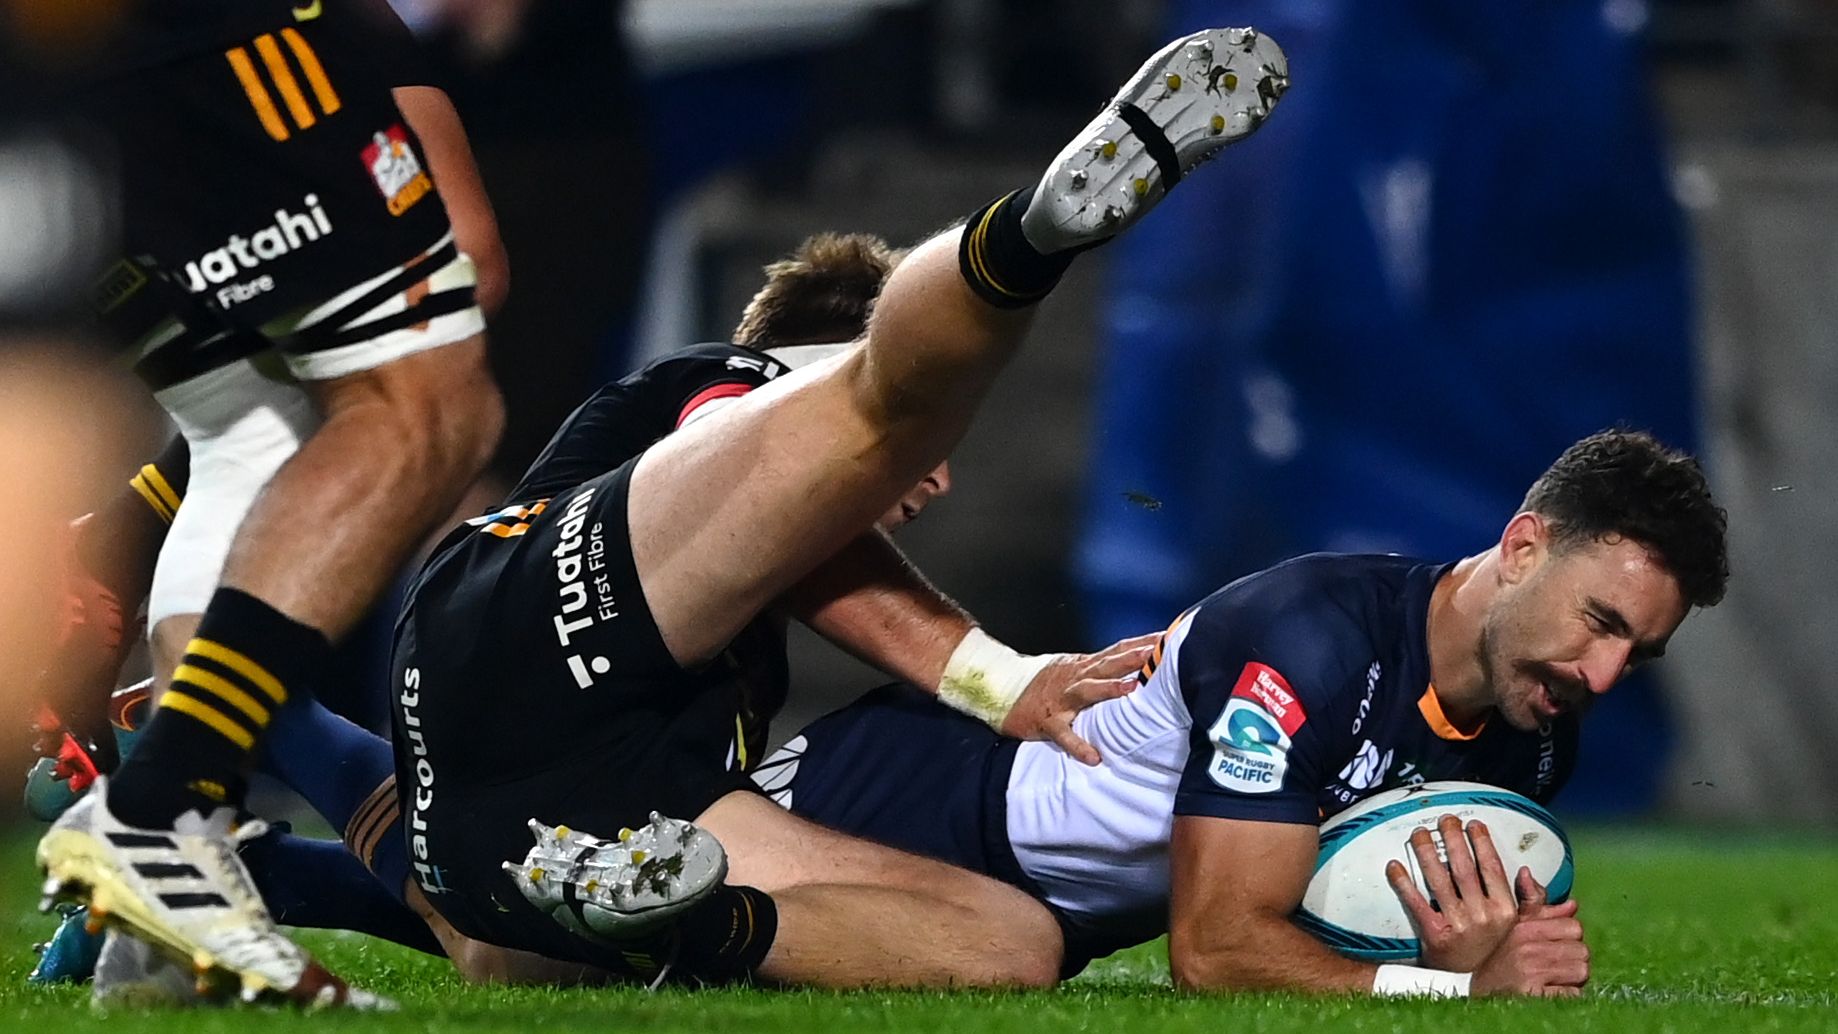 The Brumbies&#x27; Nic White dives over to score a try.